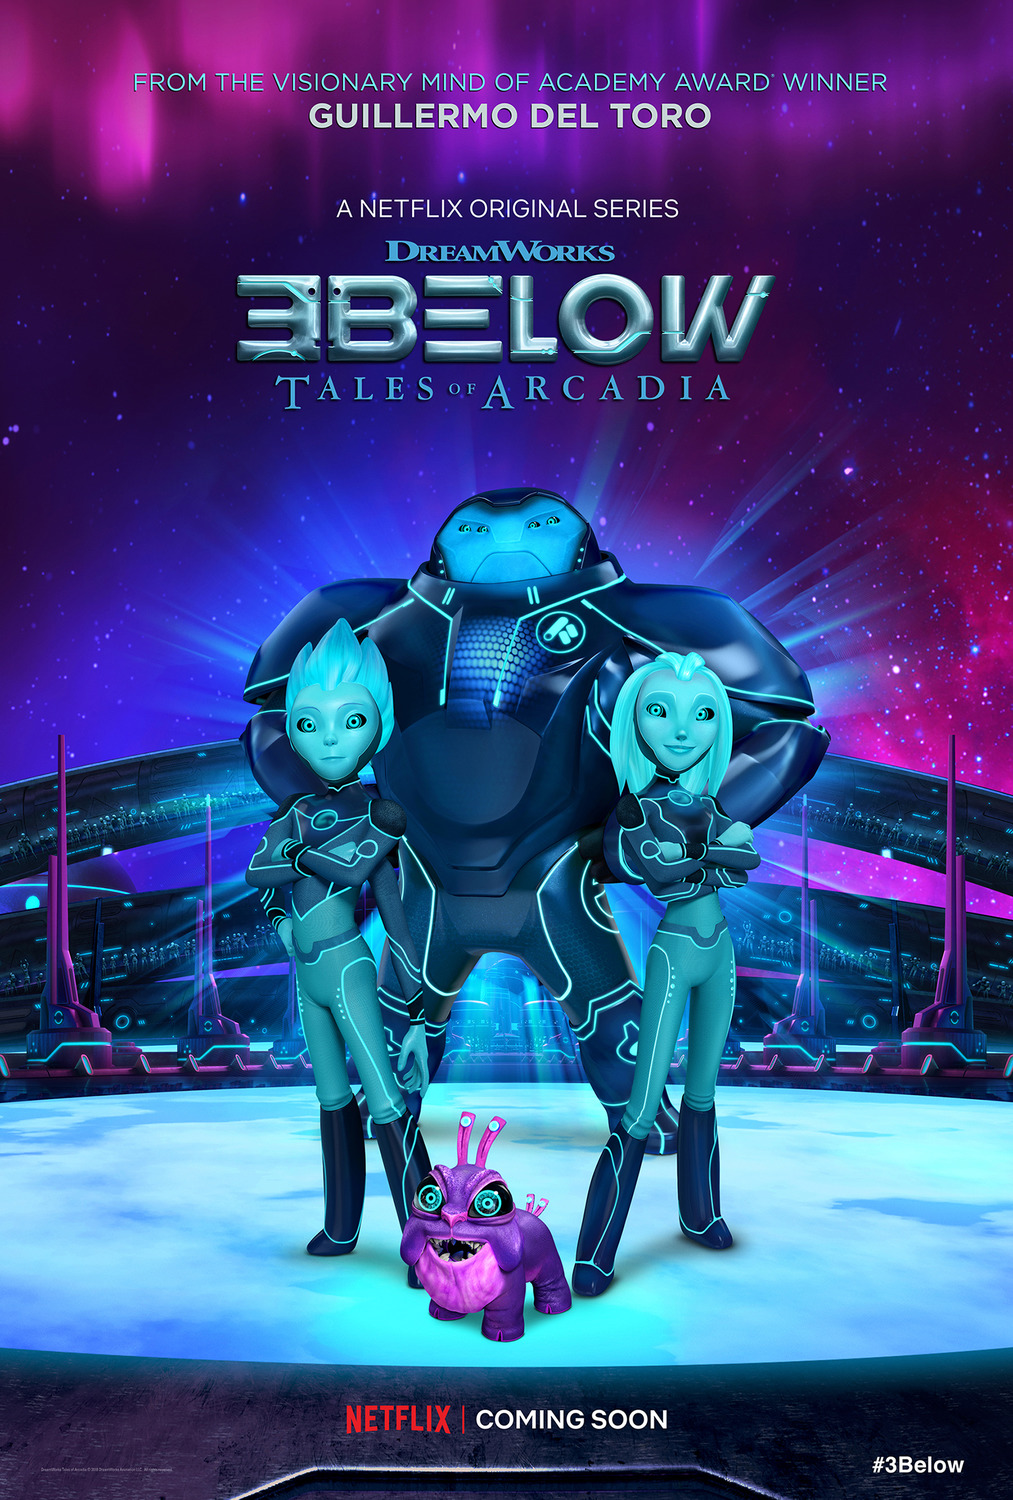 Extra Large TV Poster Image for 3Below: Tales of Arcadia (#1 of 2)